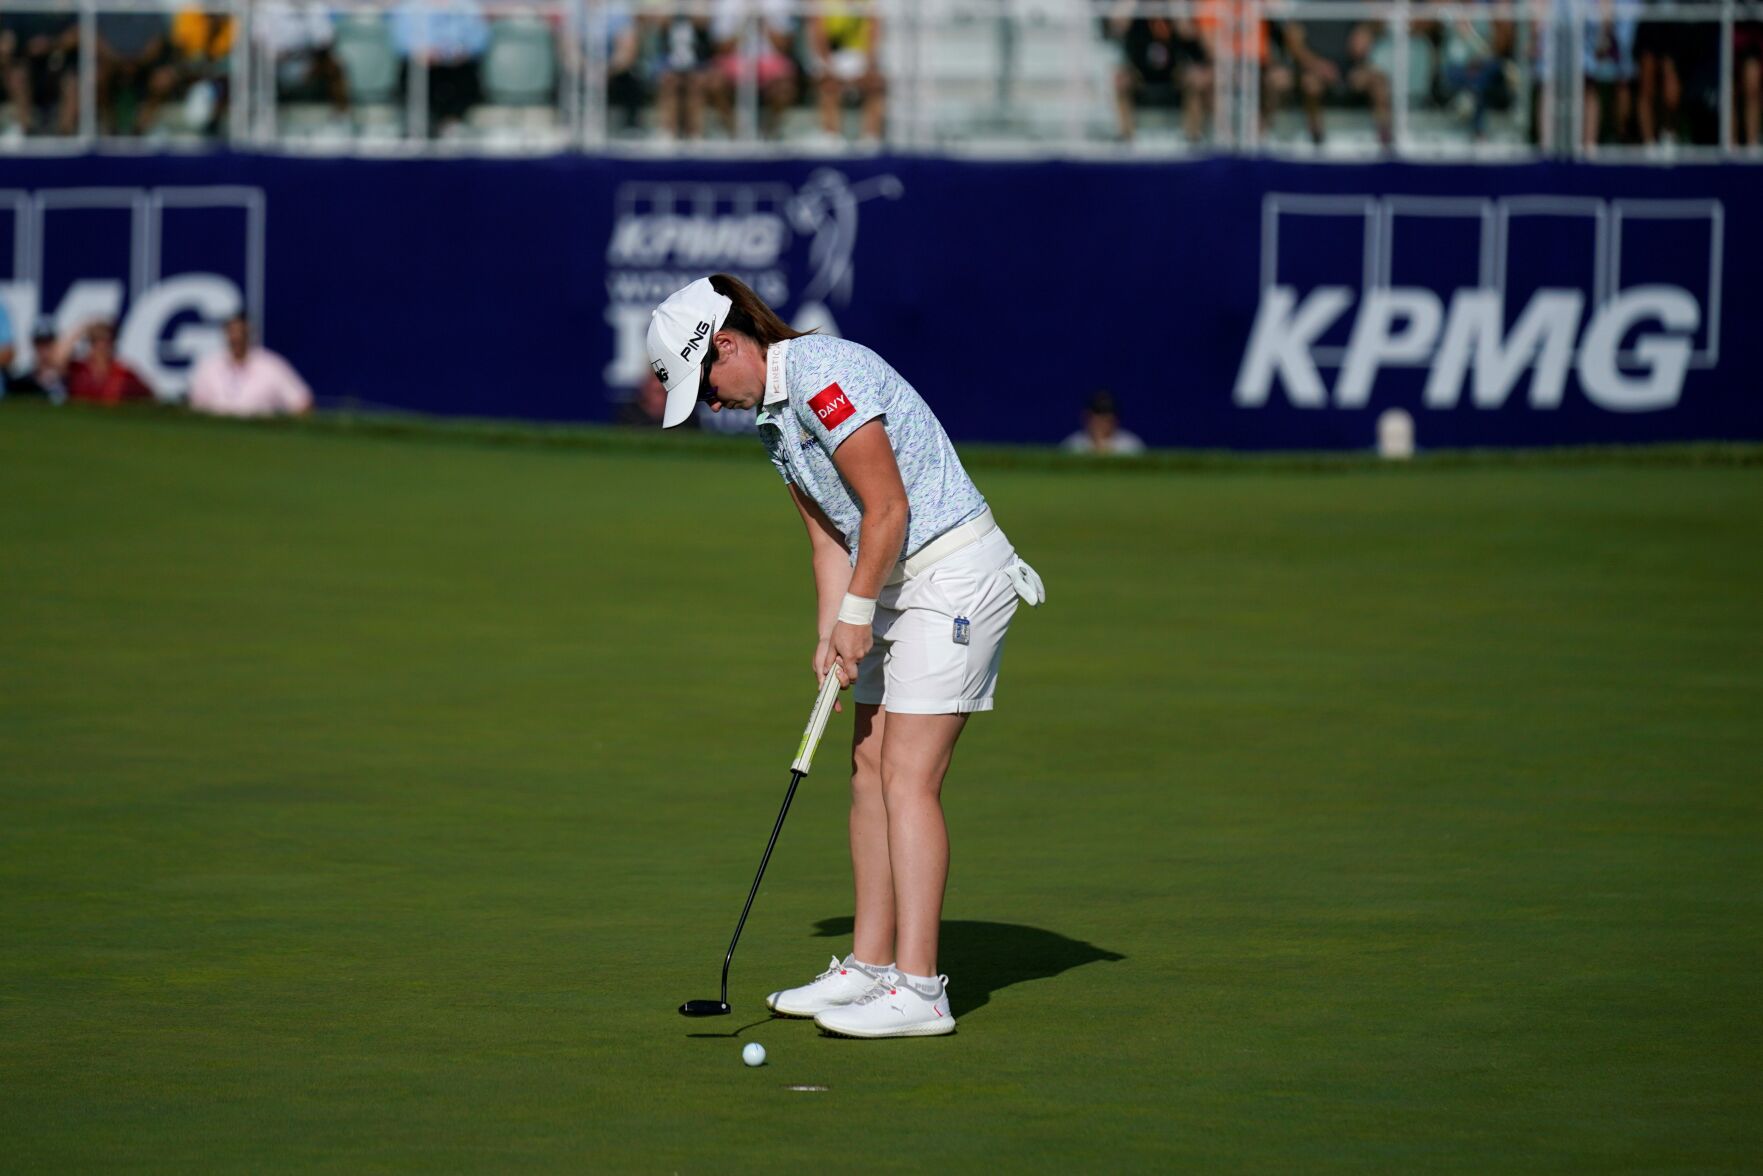 Maguire retains 1-shot lead in Women's PGA Championship with Jenny